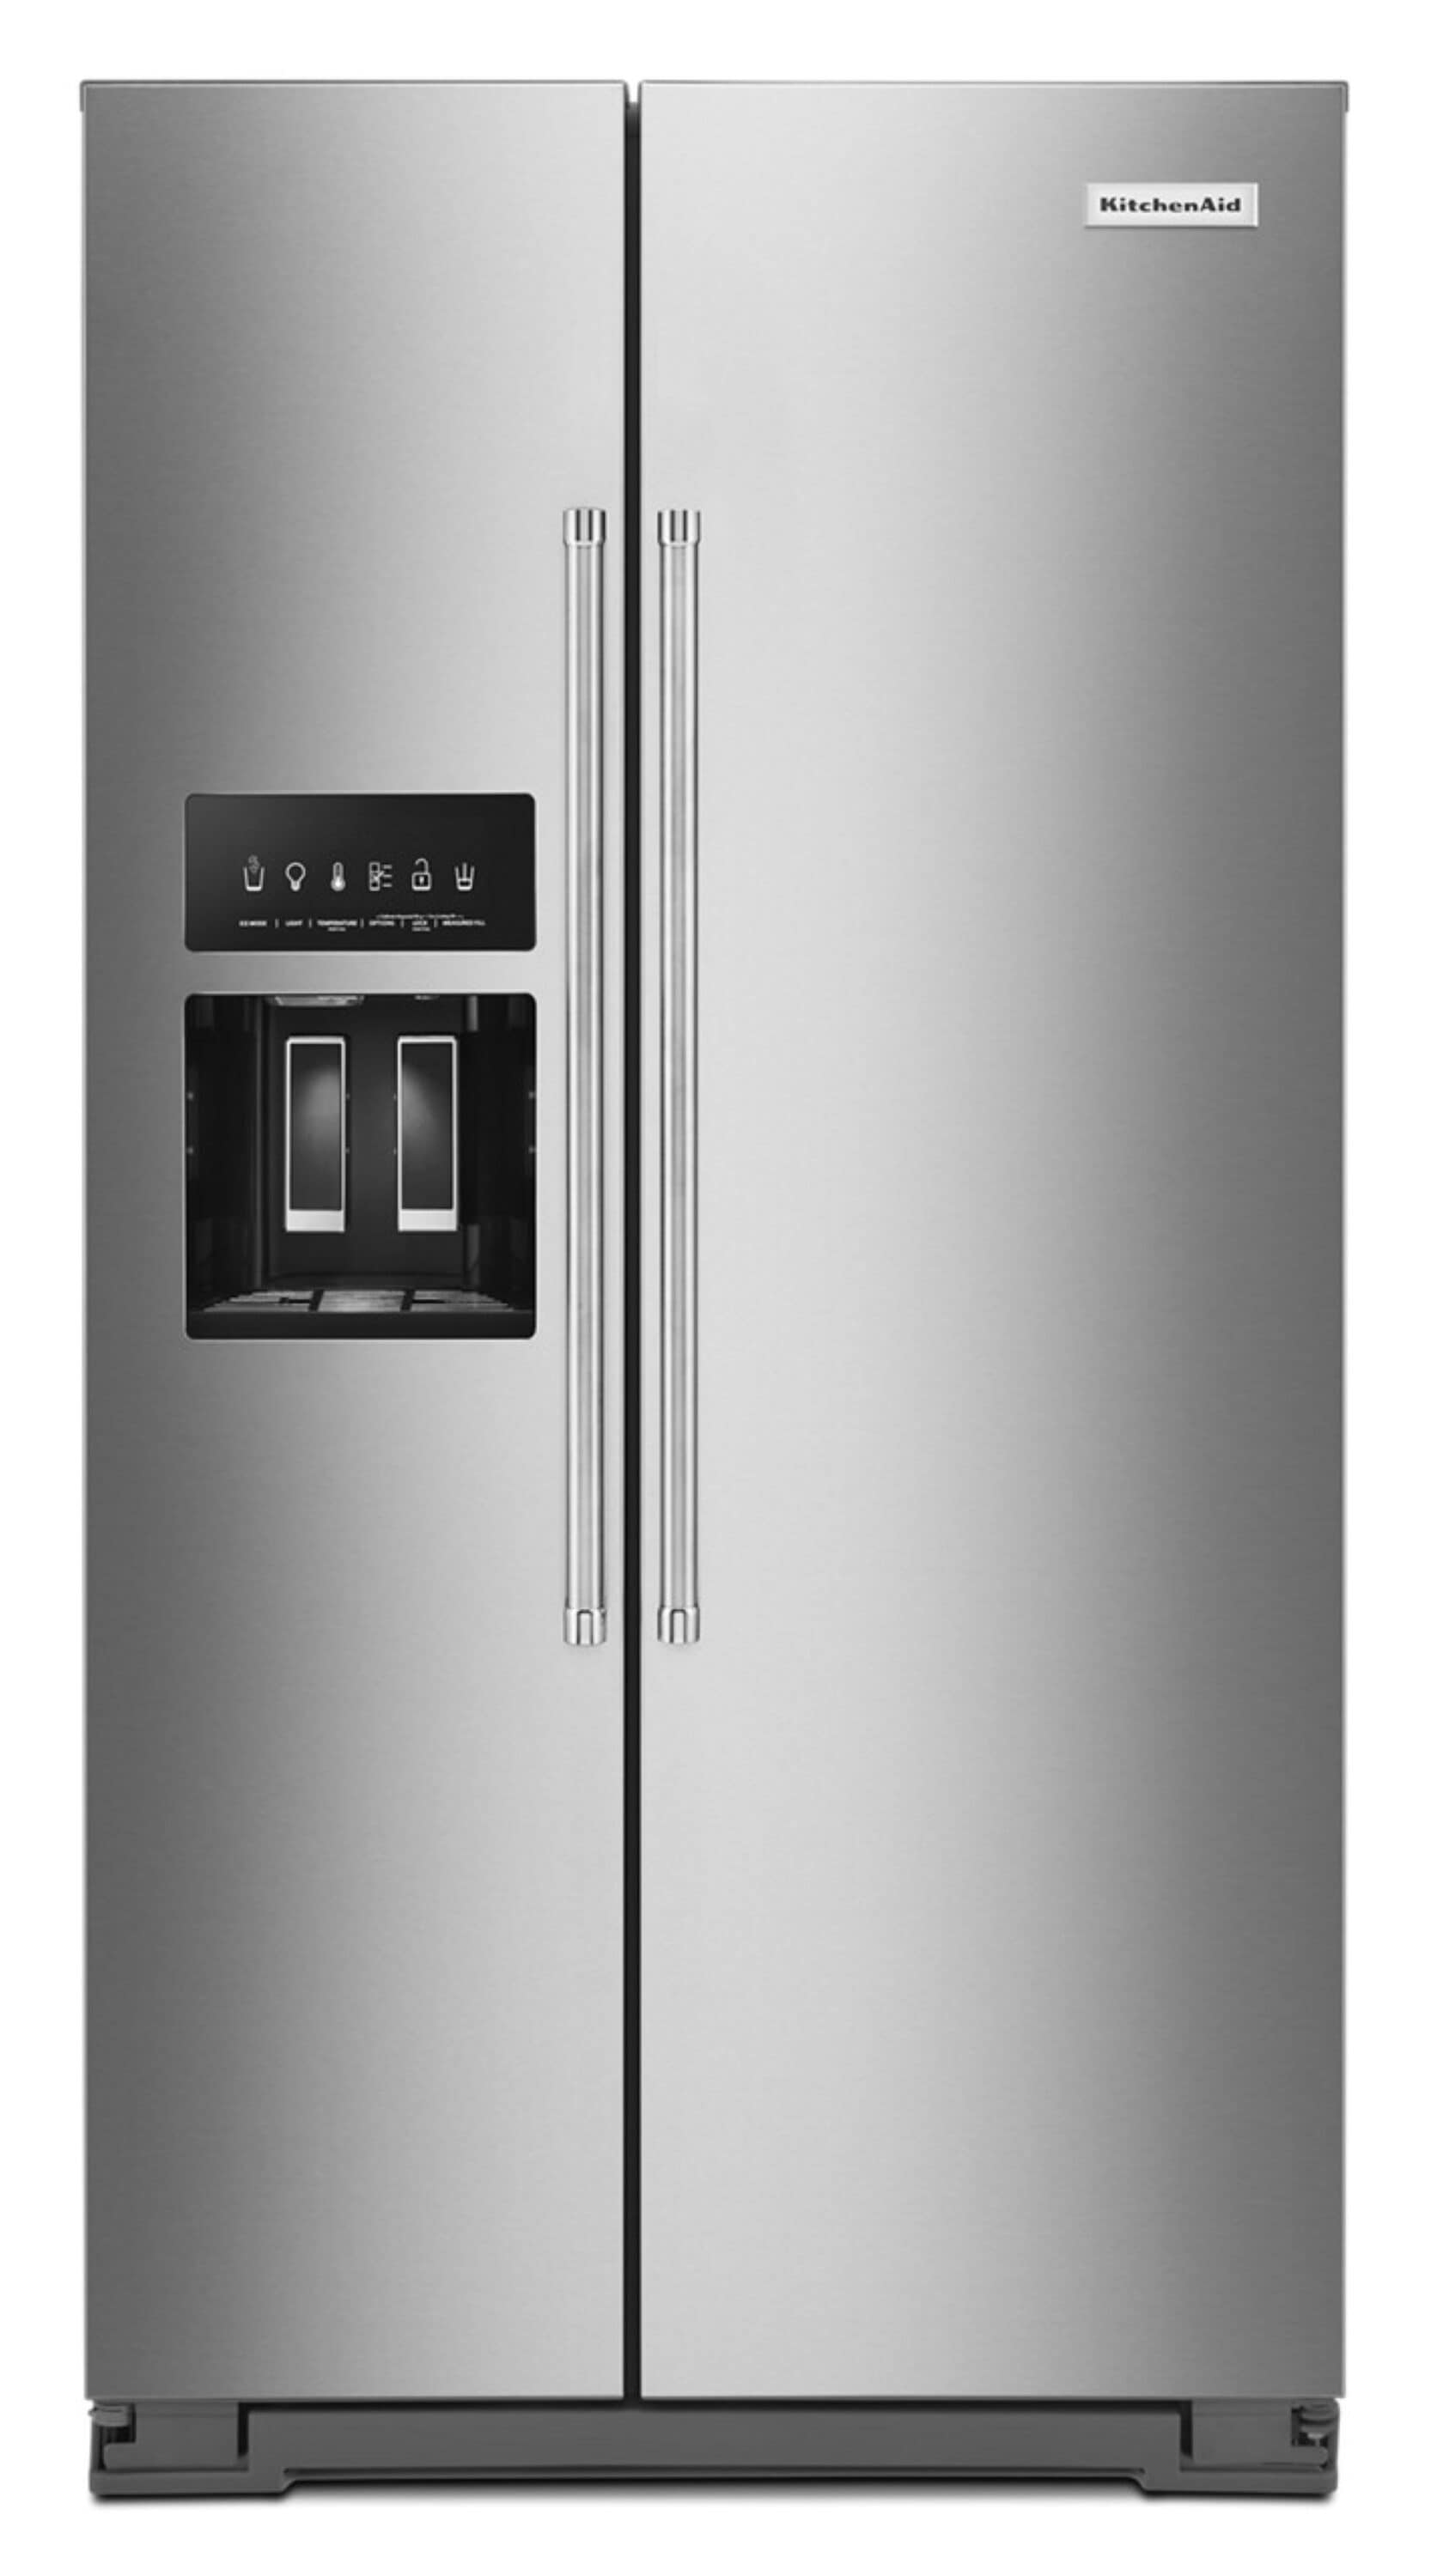 9 Amazing Kitchenaid Water Filter For Refrigerator for 2023